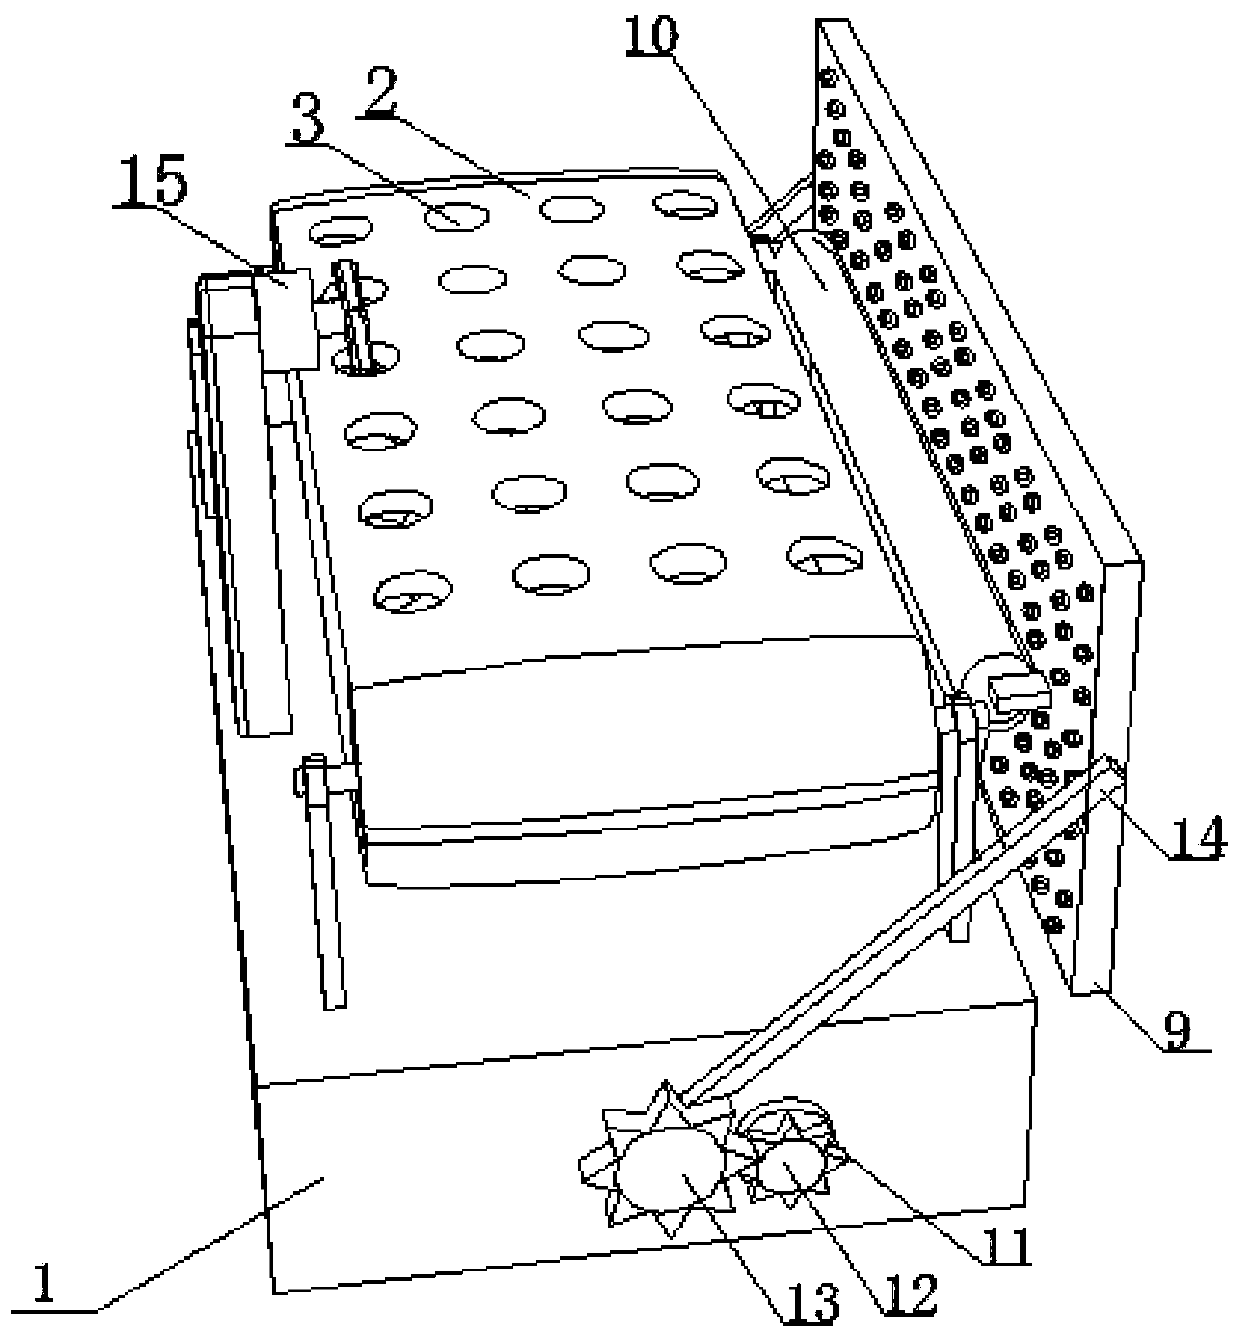 A processing device for drying agricultural fruits